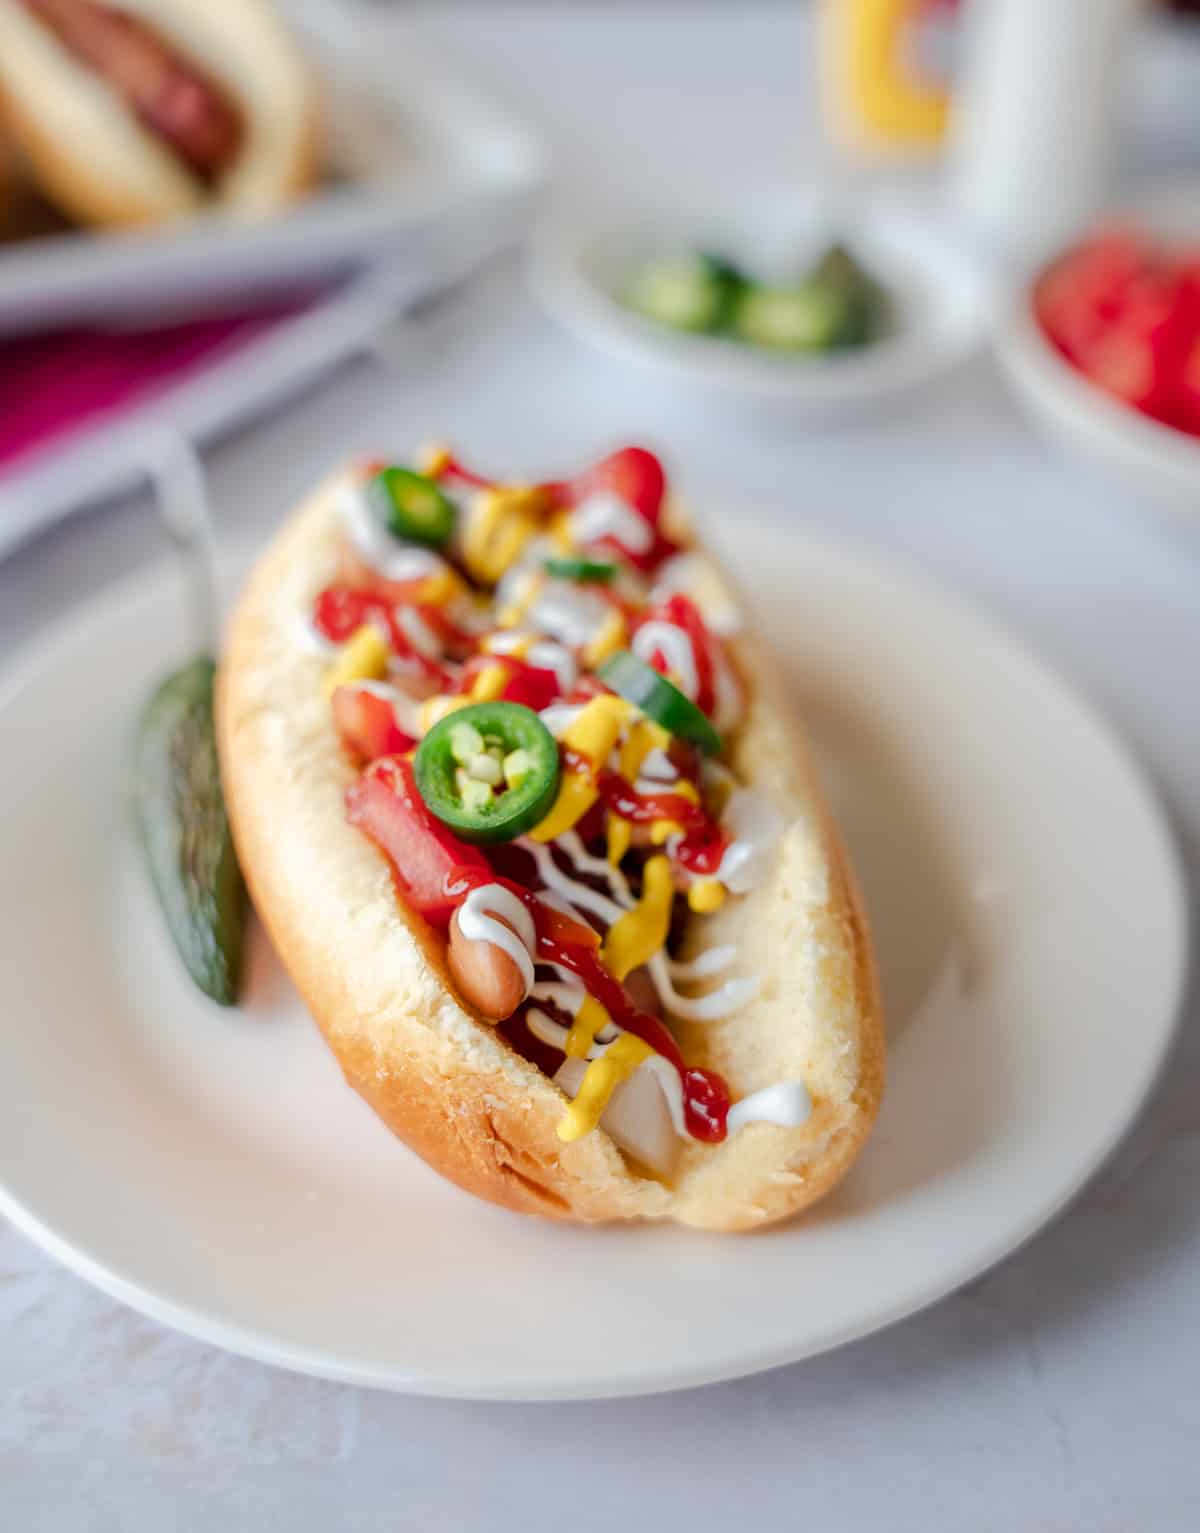 Hot dog with toppings on a round plate.